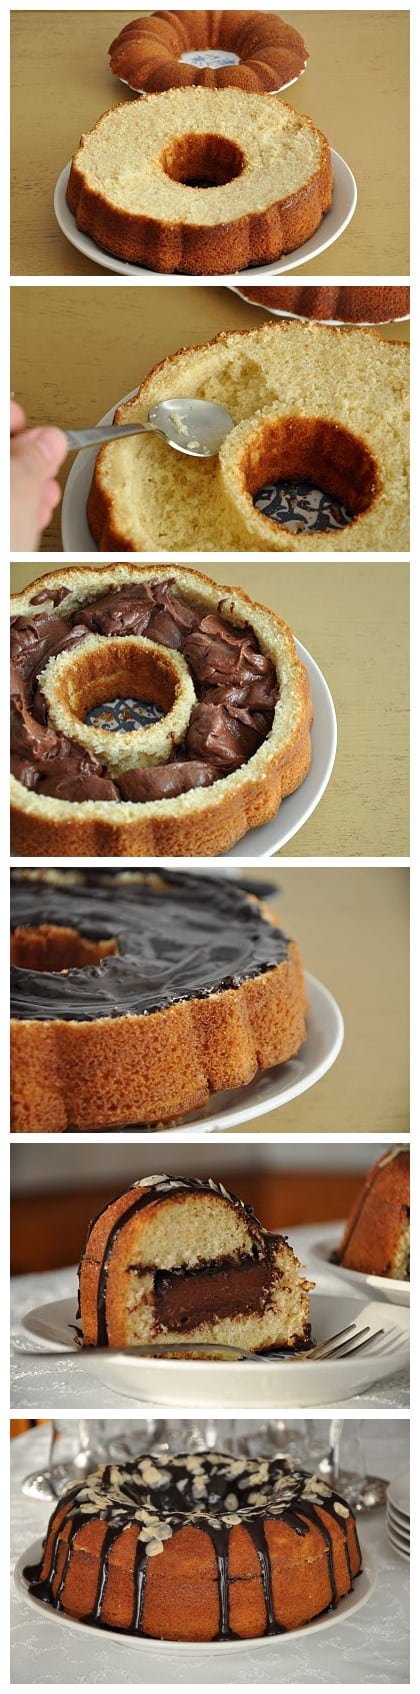 Chocolate-Filled-Cake